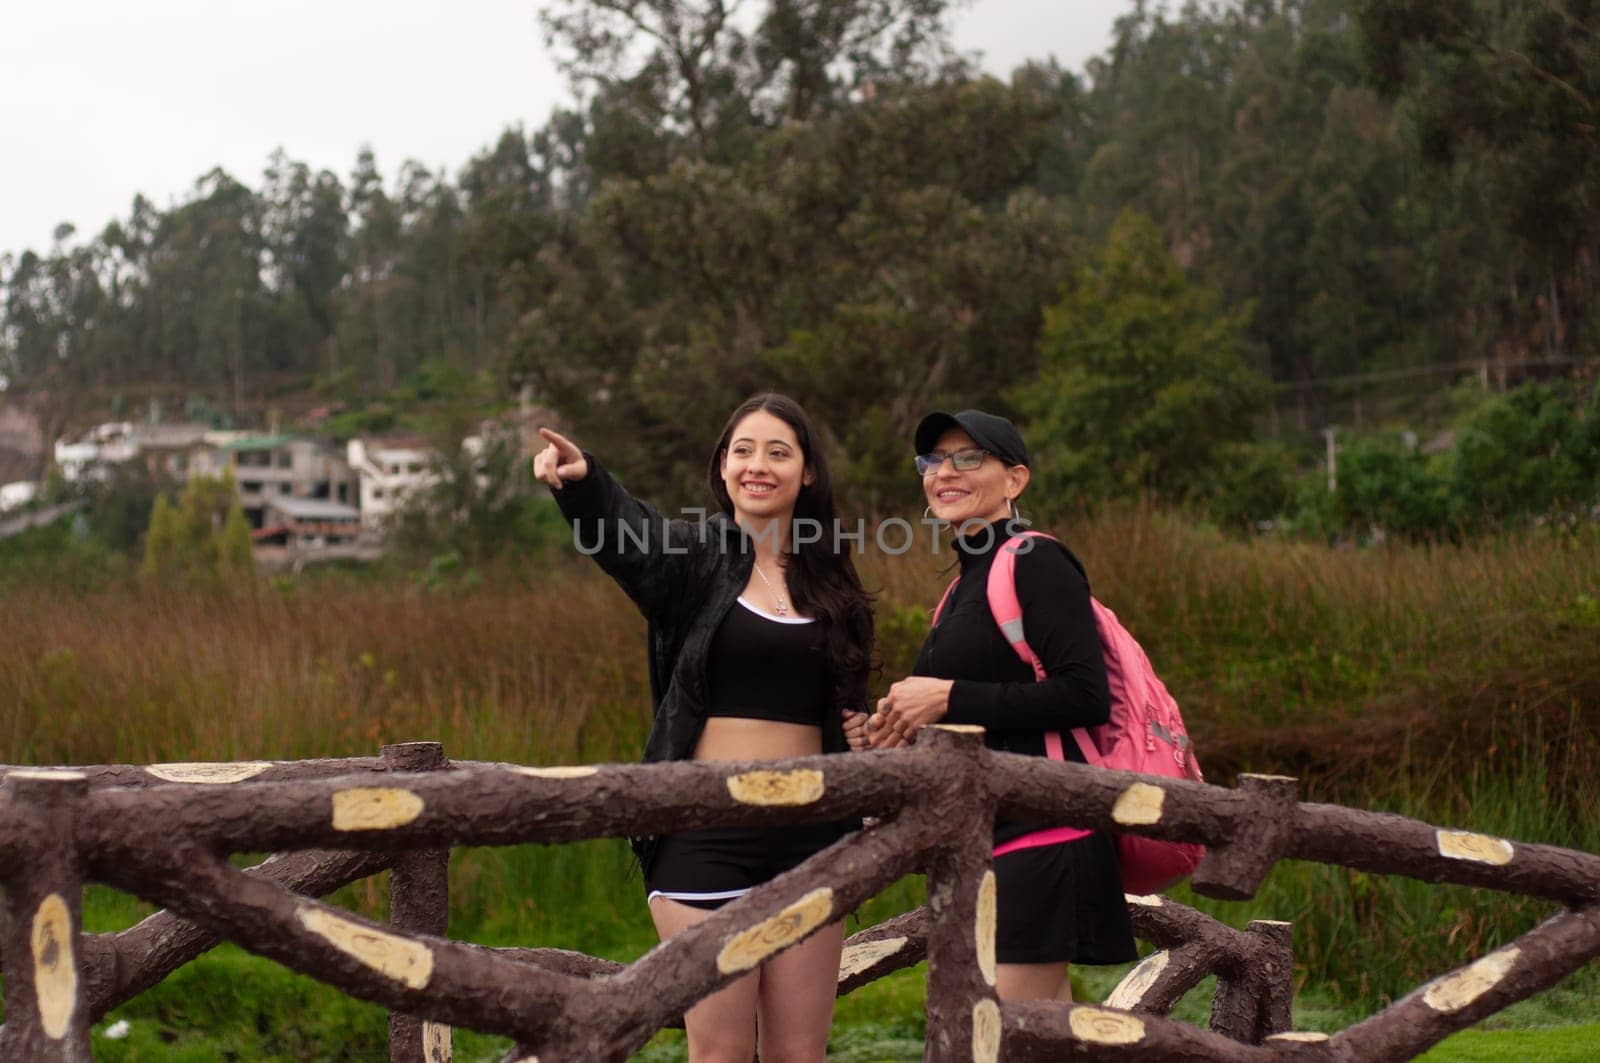 mother and daughter on a wooden bridge in a vegetation zone, the daughter points her finger to the right with an excited expression, the mother watches attentively. women's day. High quality photo